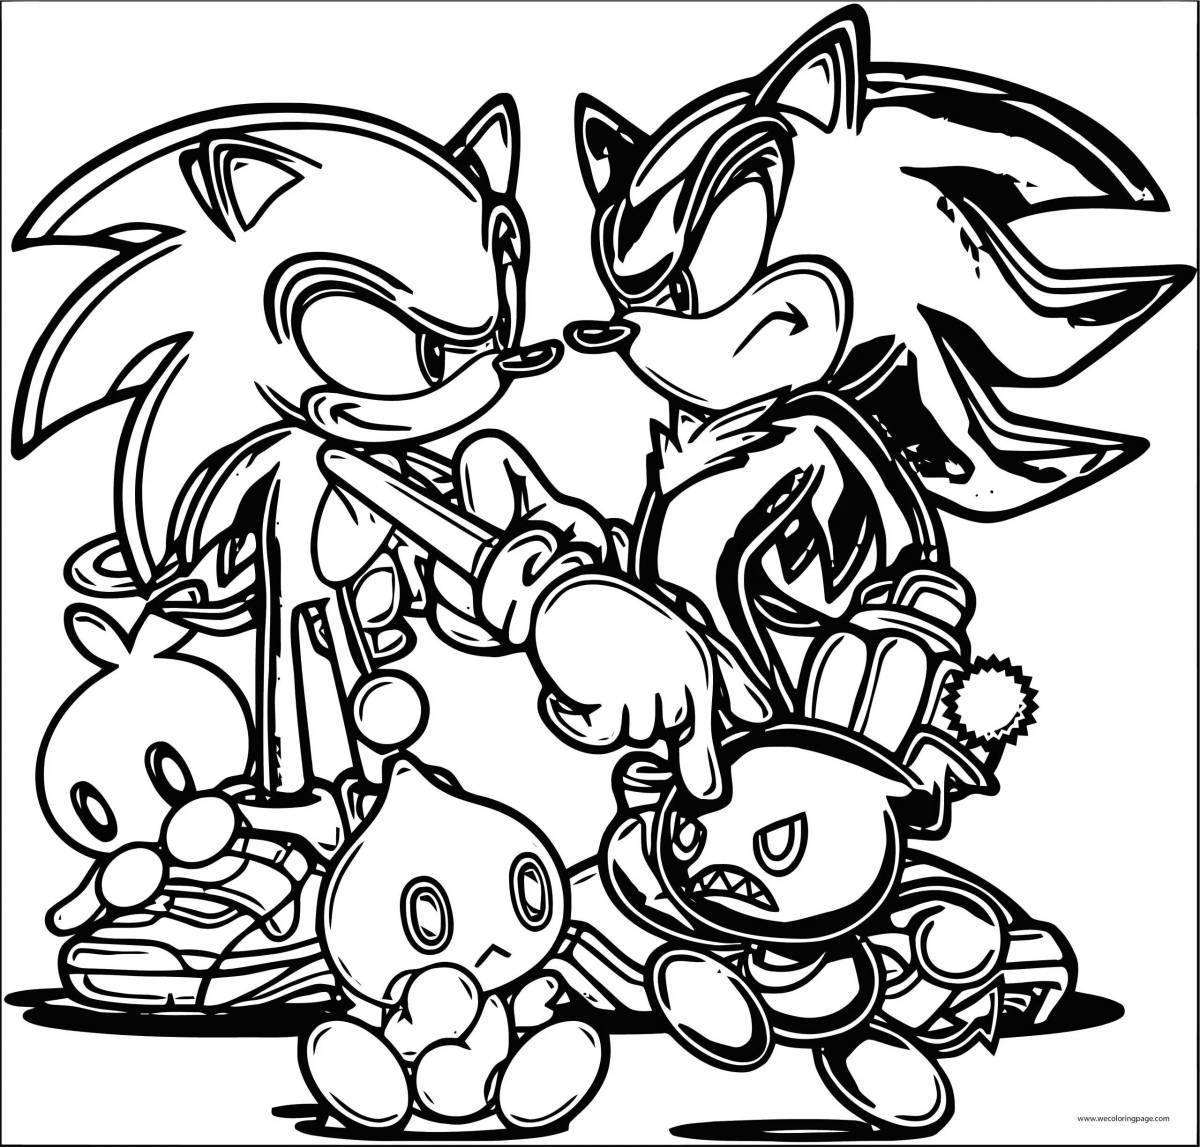 Animated sonic shadow coloring page